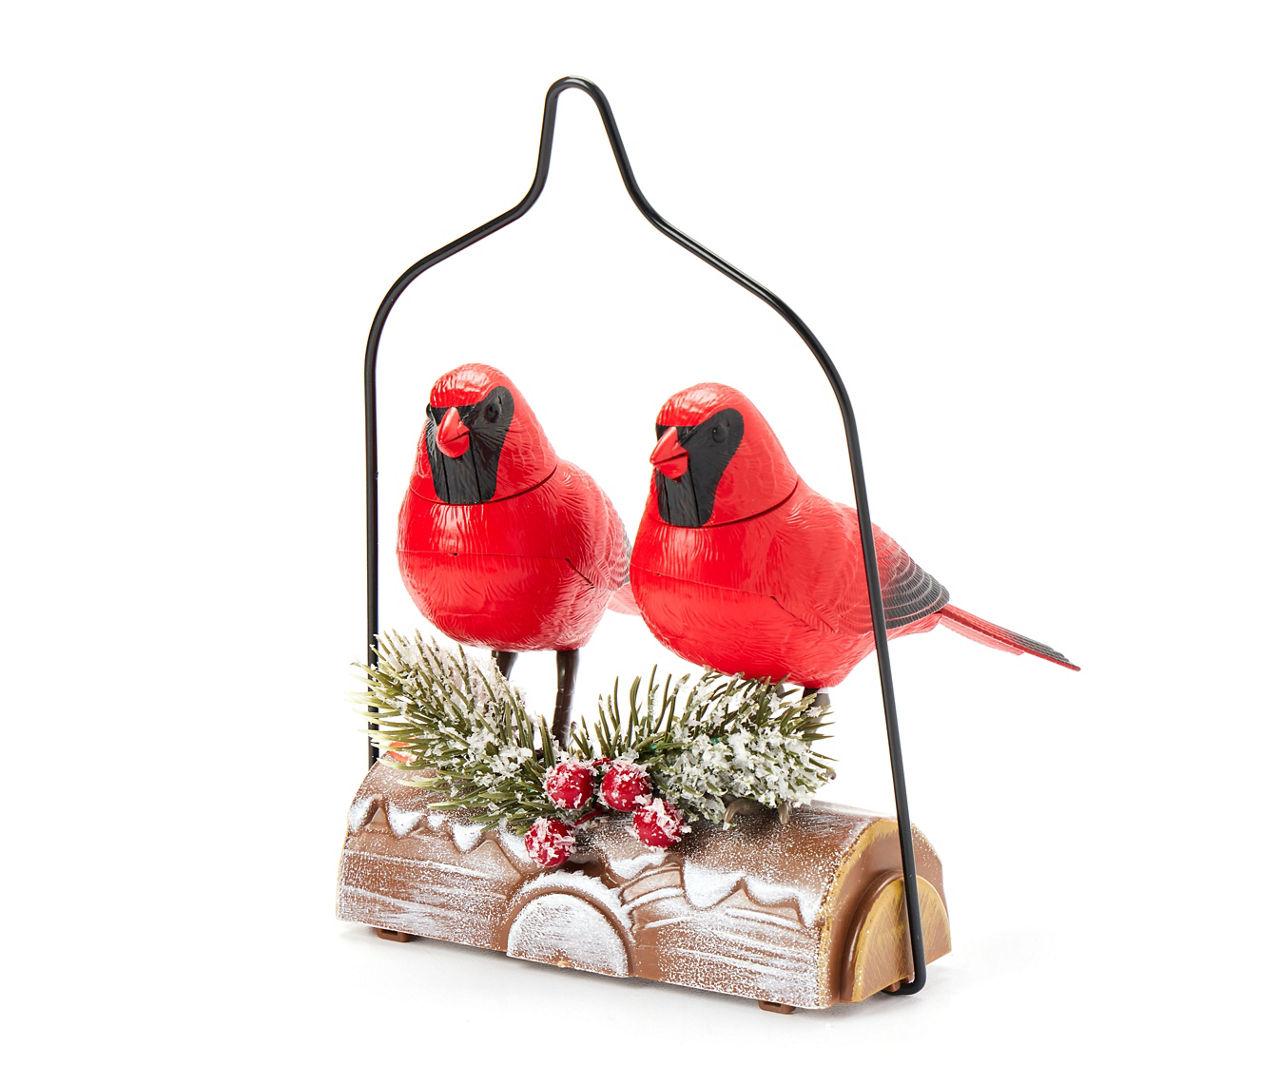 Witty Wings — CARING CARDINALS